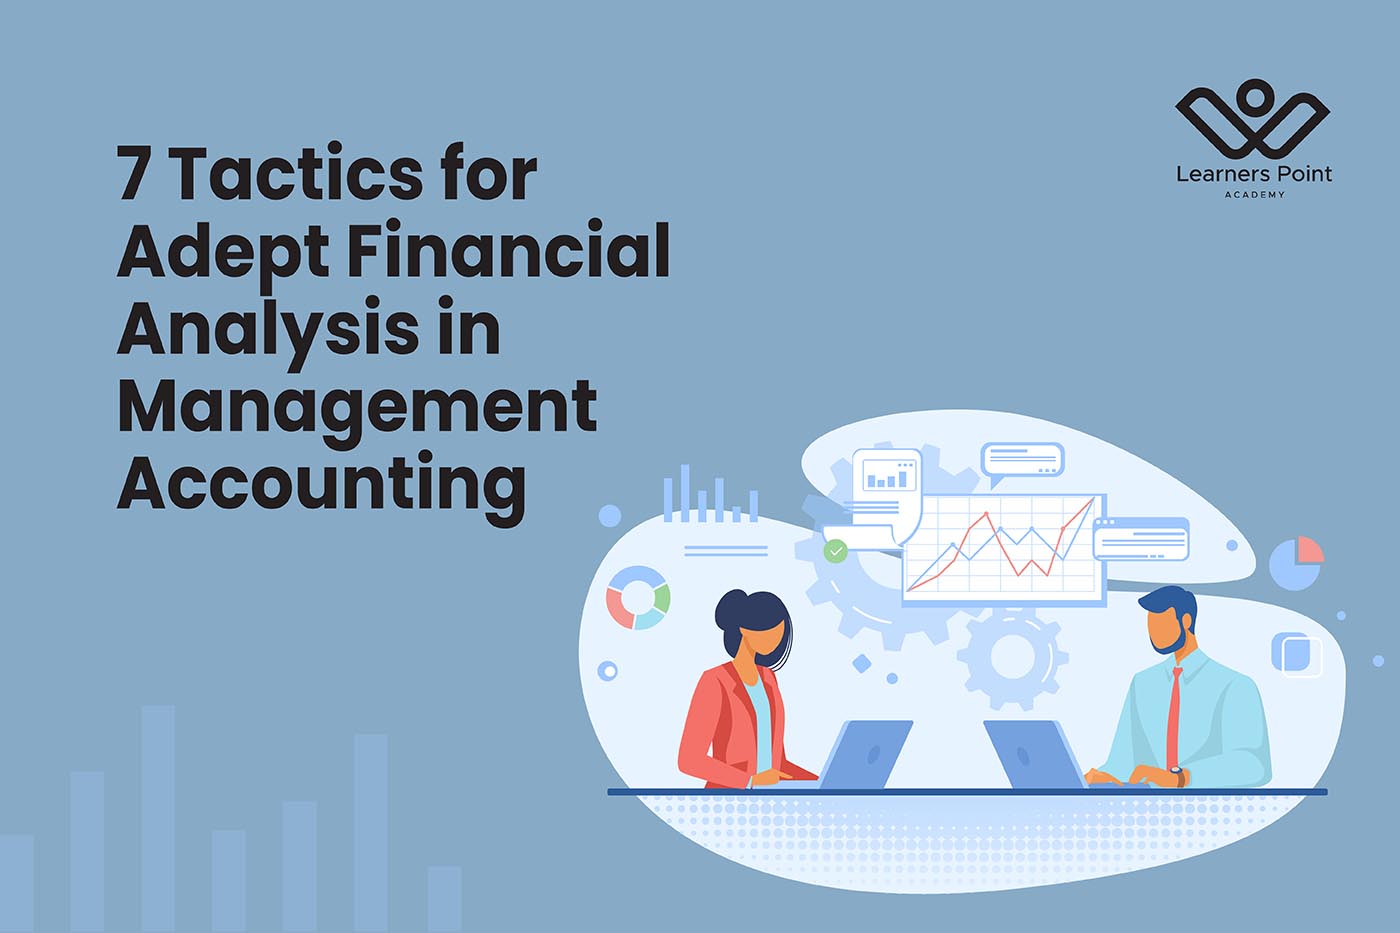 7 Tactics for Adept Financial Analysis in Management Accounting